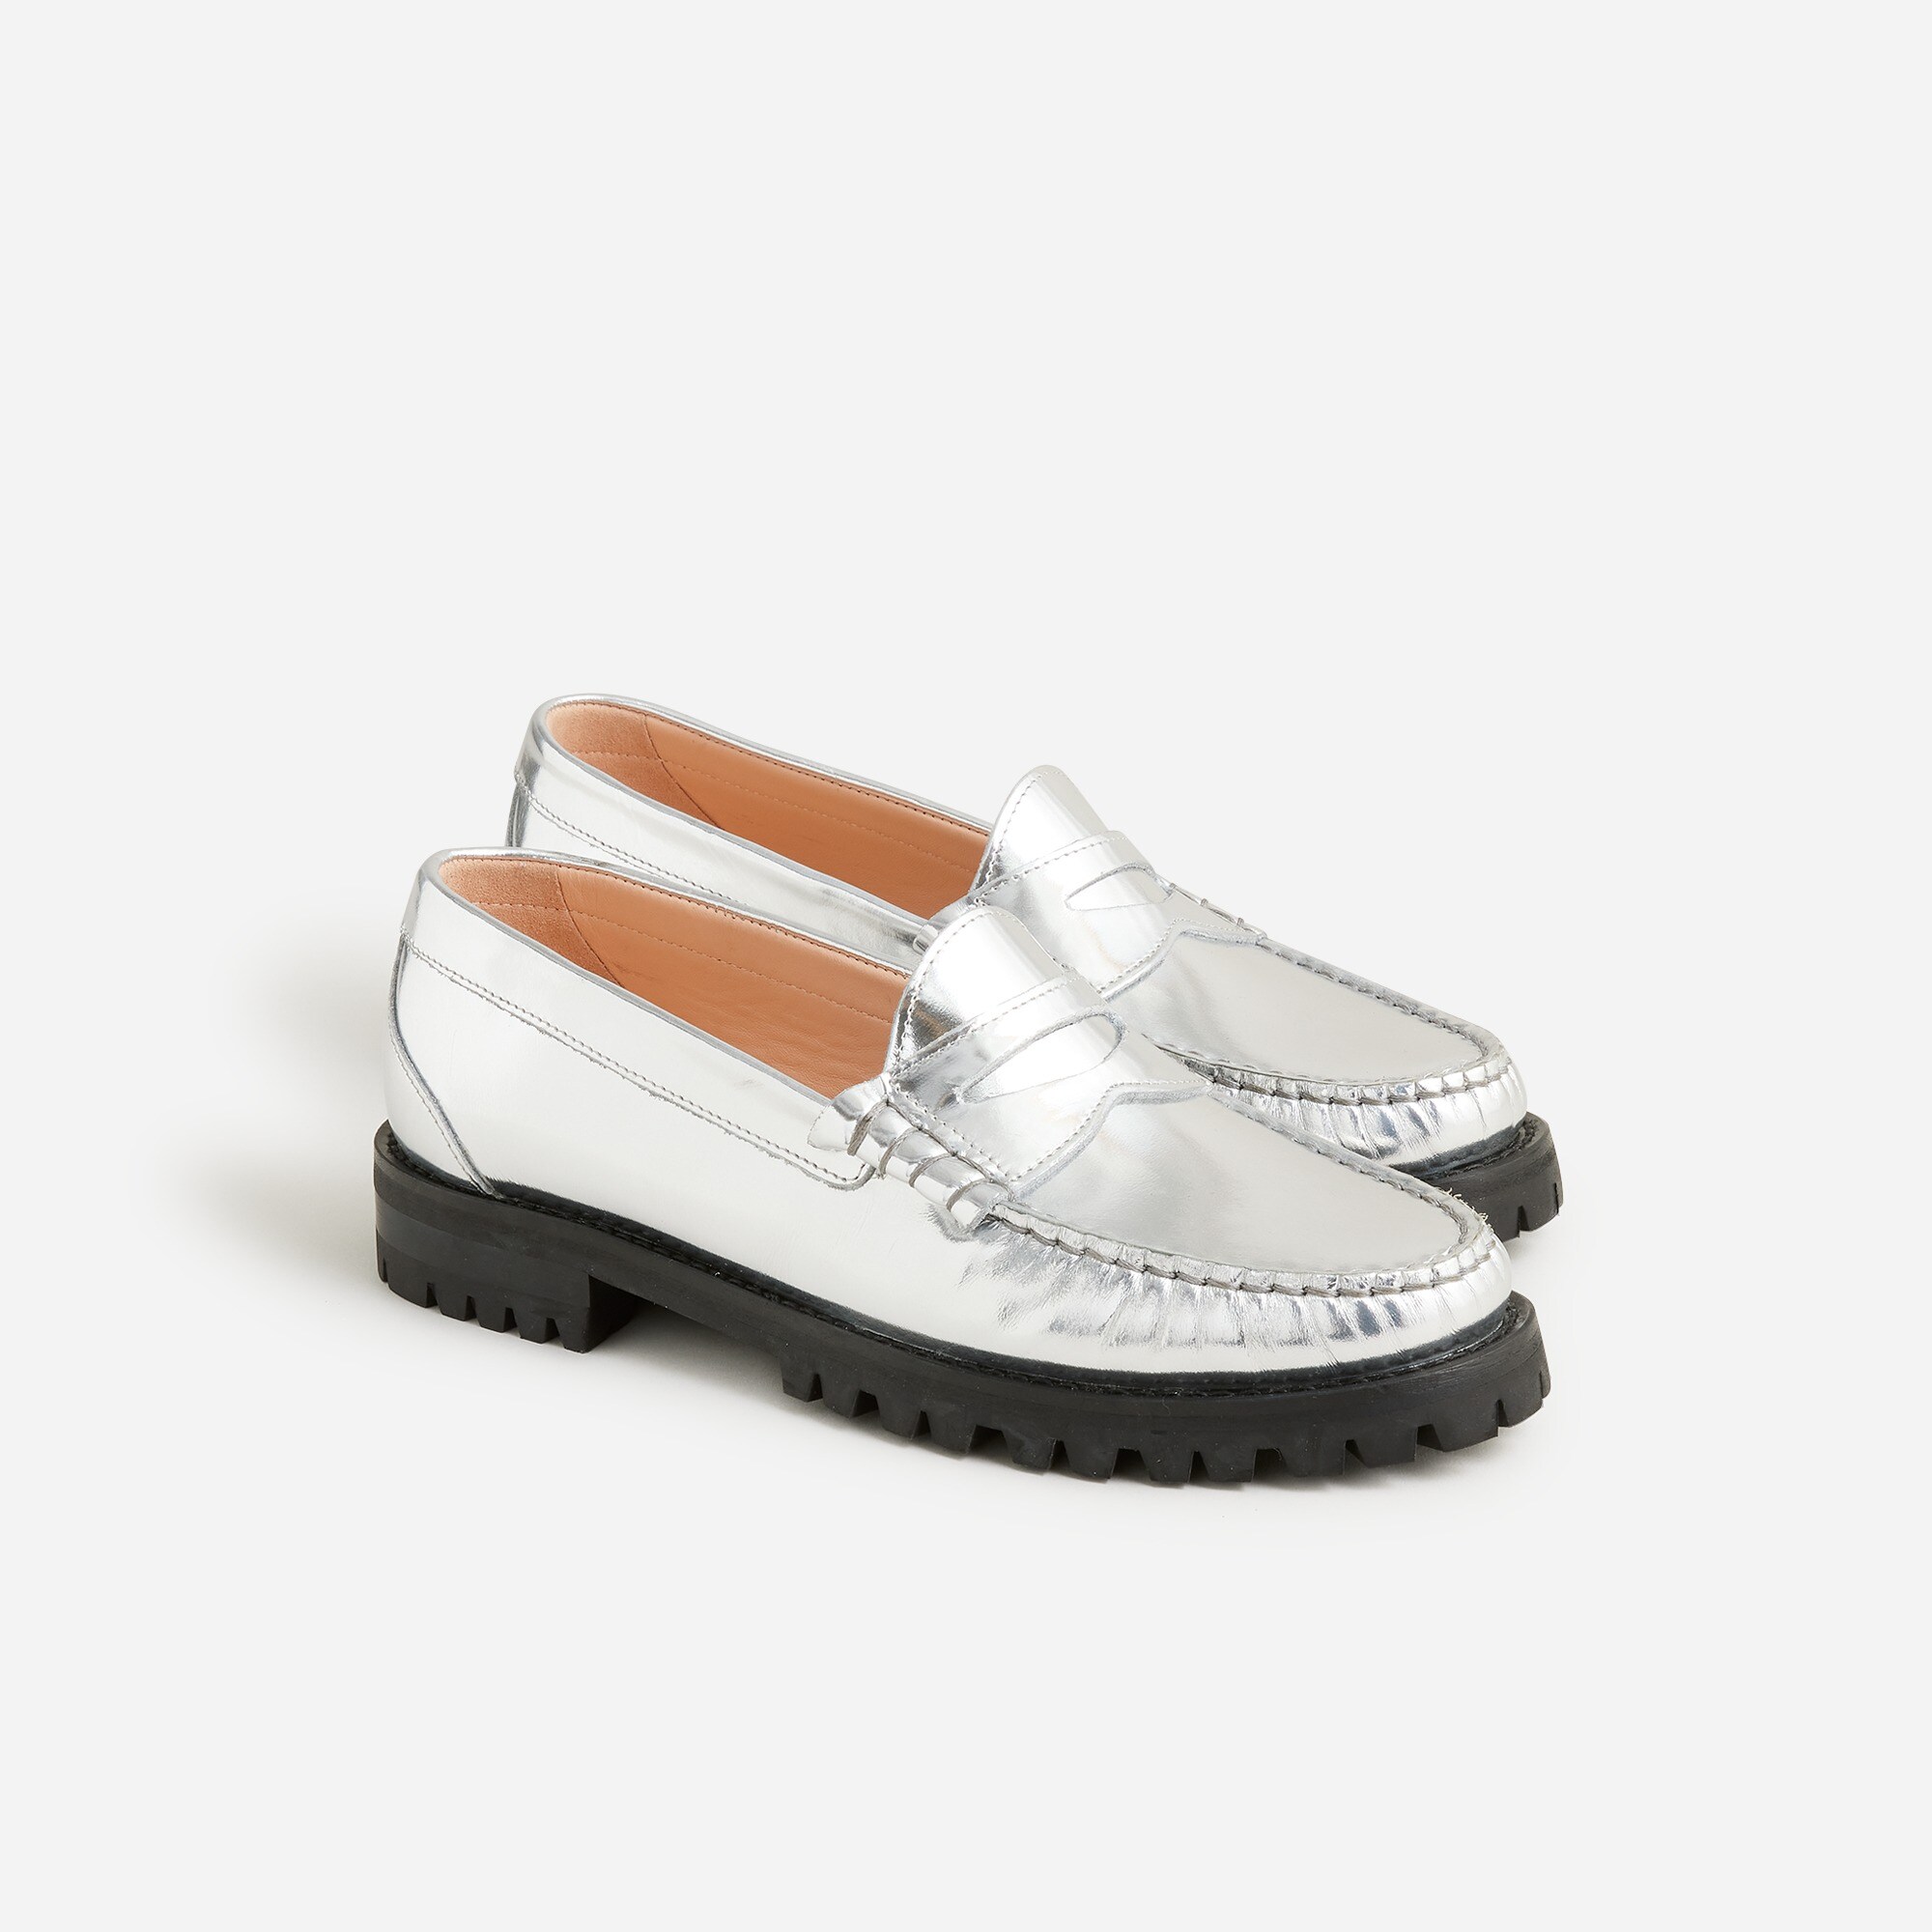 womens Winona lug-sole penny loafers in metallic leather